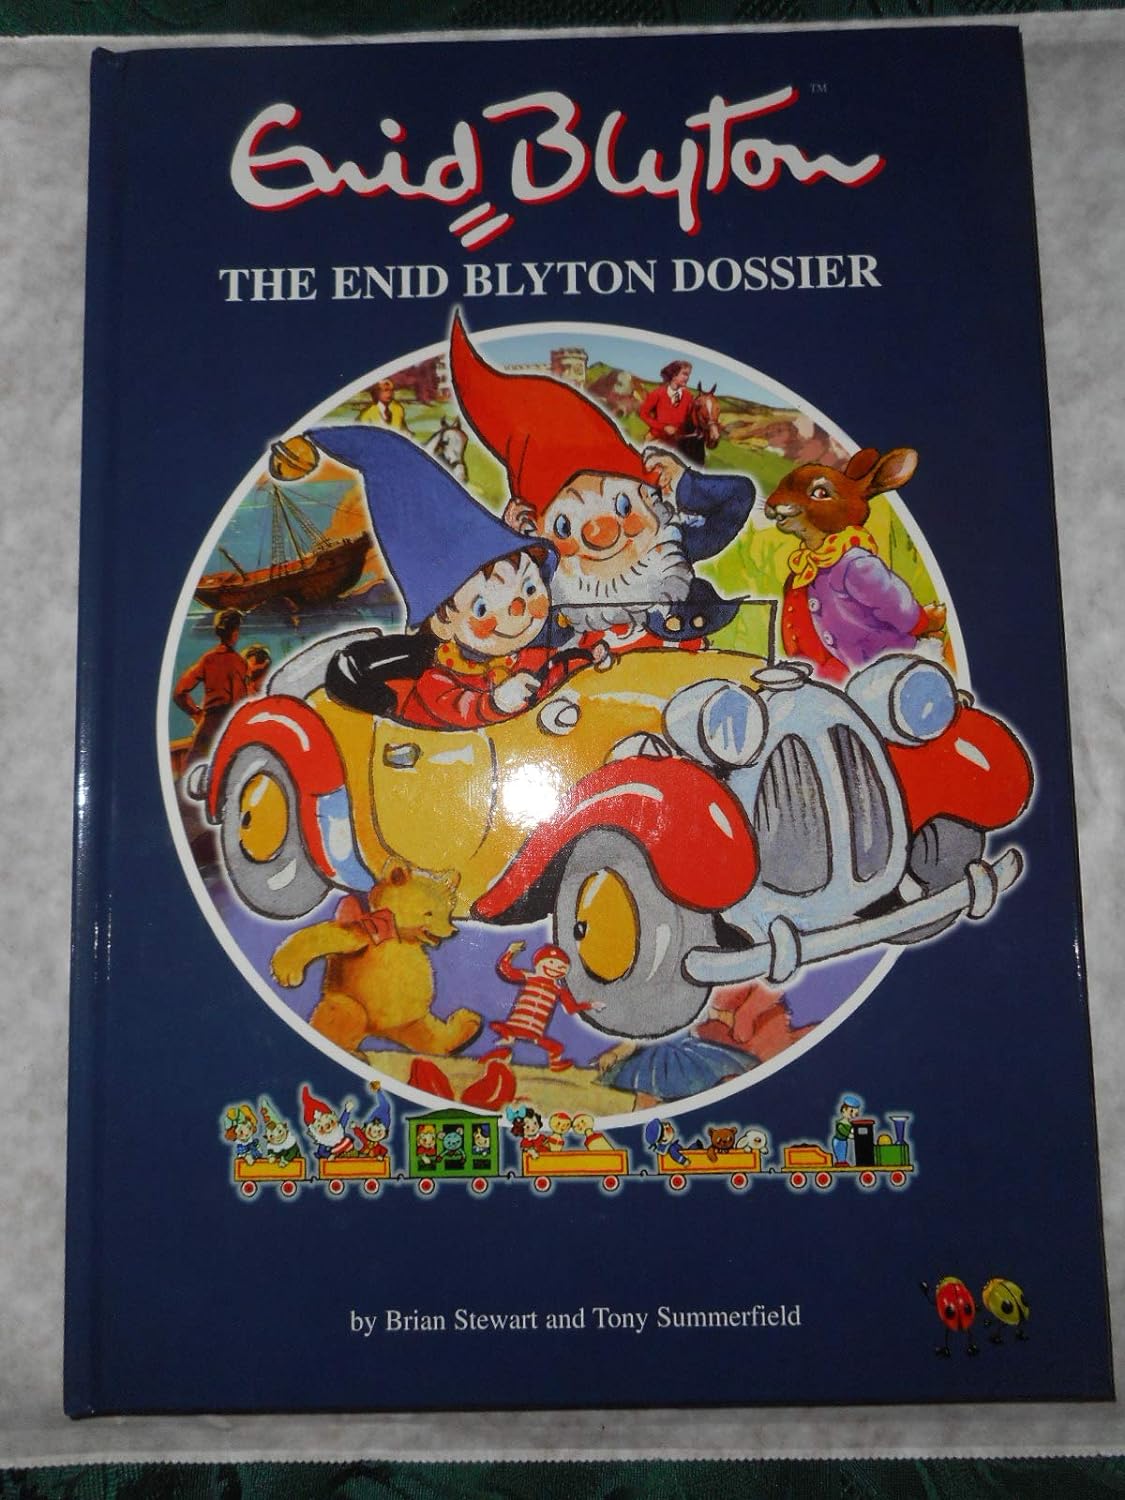 Brian Stewart and Tony Summerfield: The Enid Blyton Dossier (Second Hand)